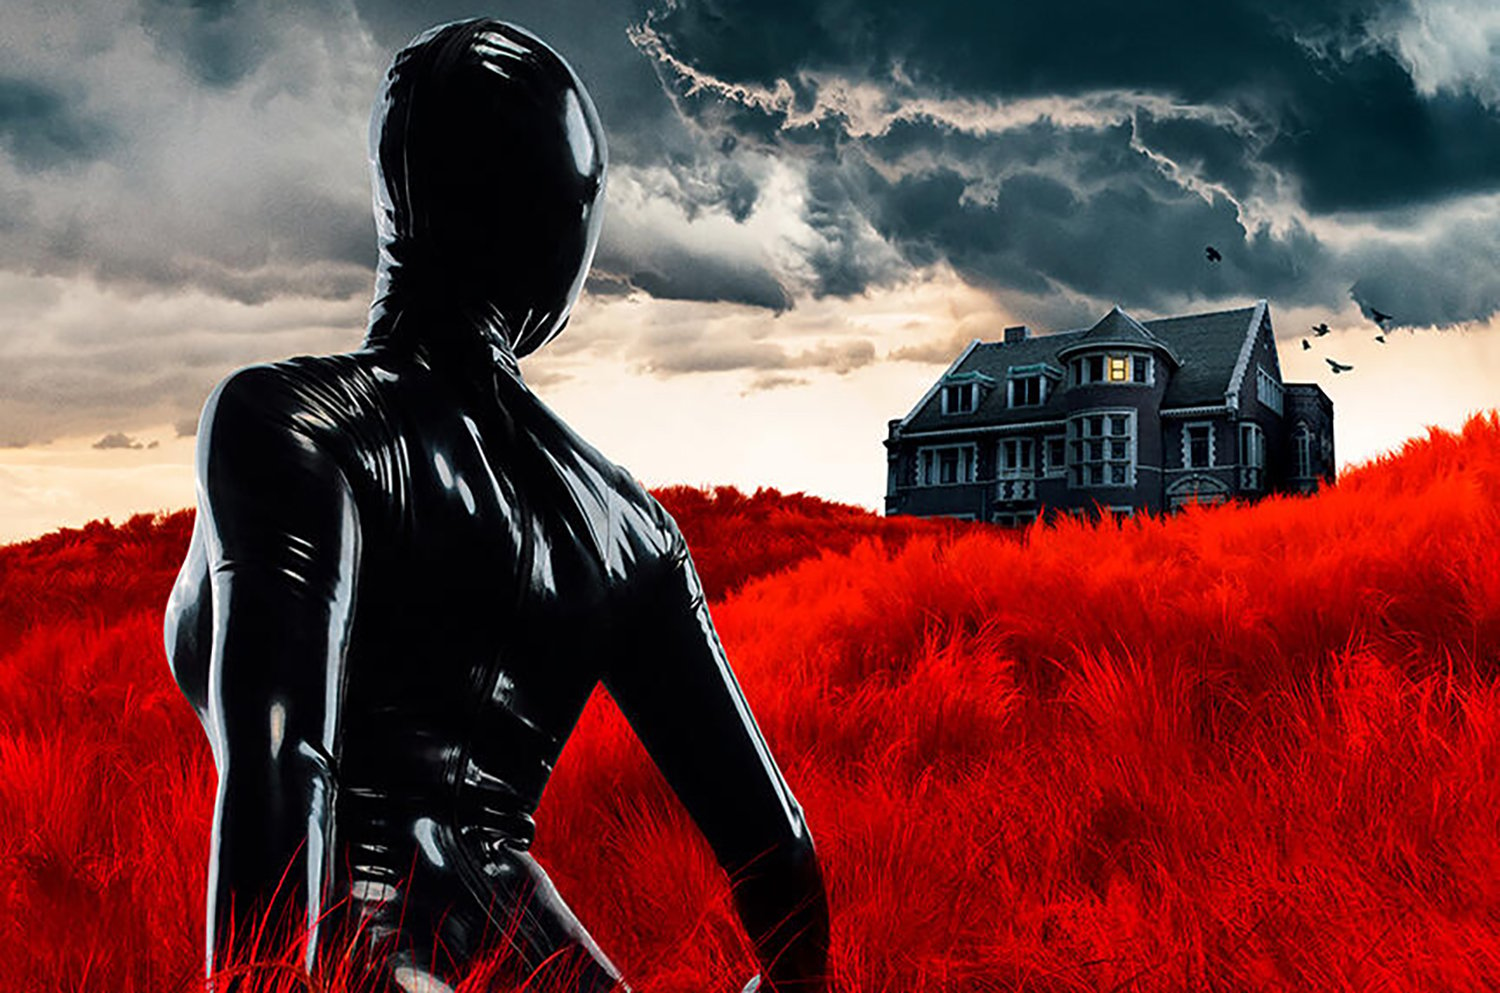 American Horror Stories Season 2 key art to represent the episode list and release schedule